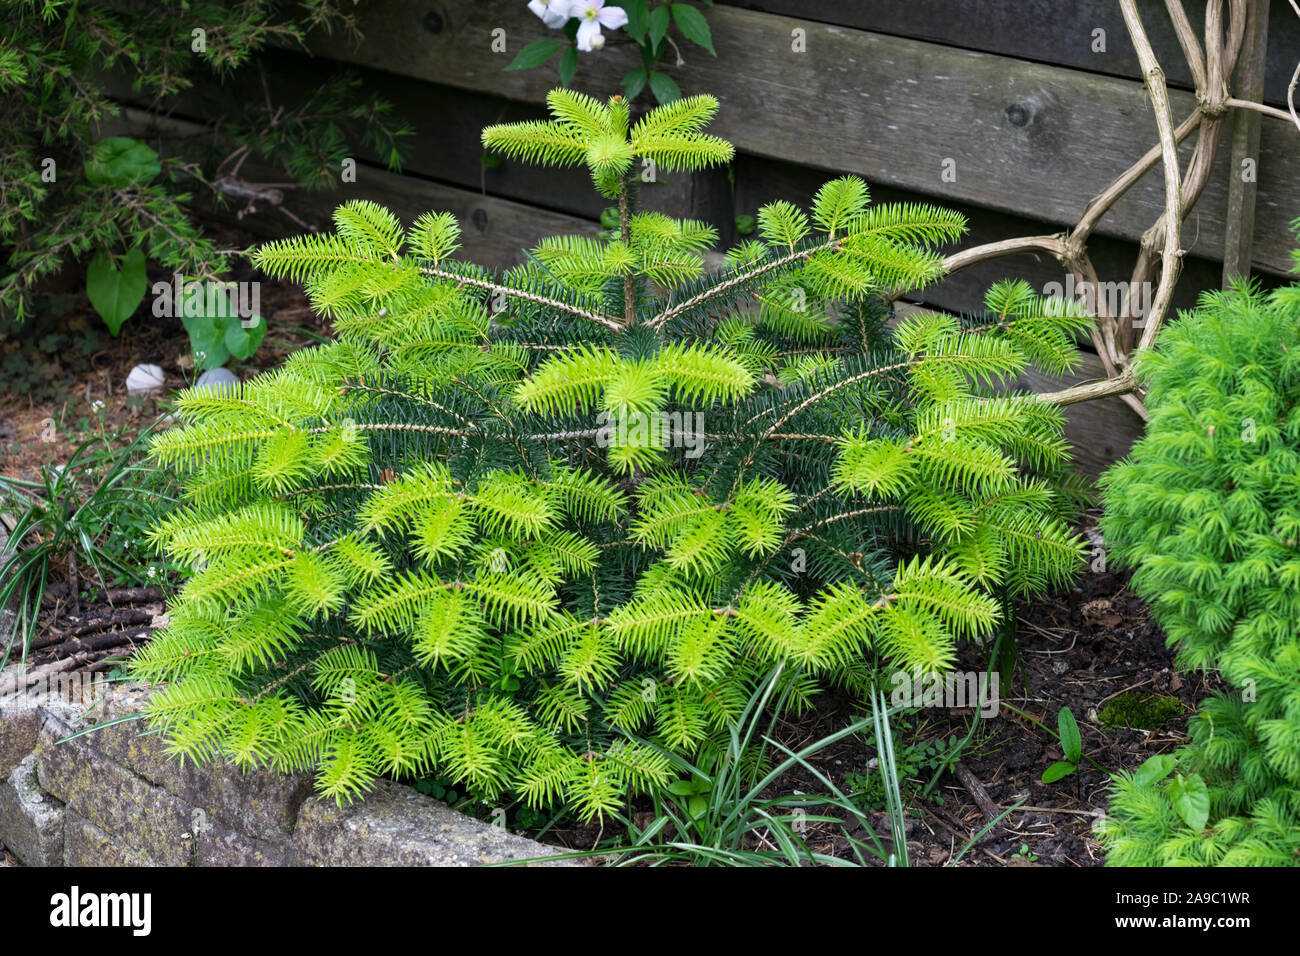 Young Spanish fir (Abies pinsapo) with fresh shoots Stock Photo